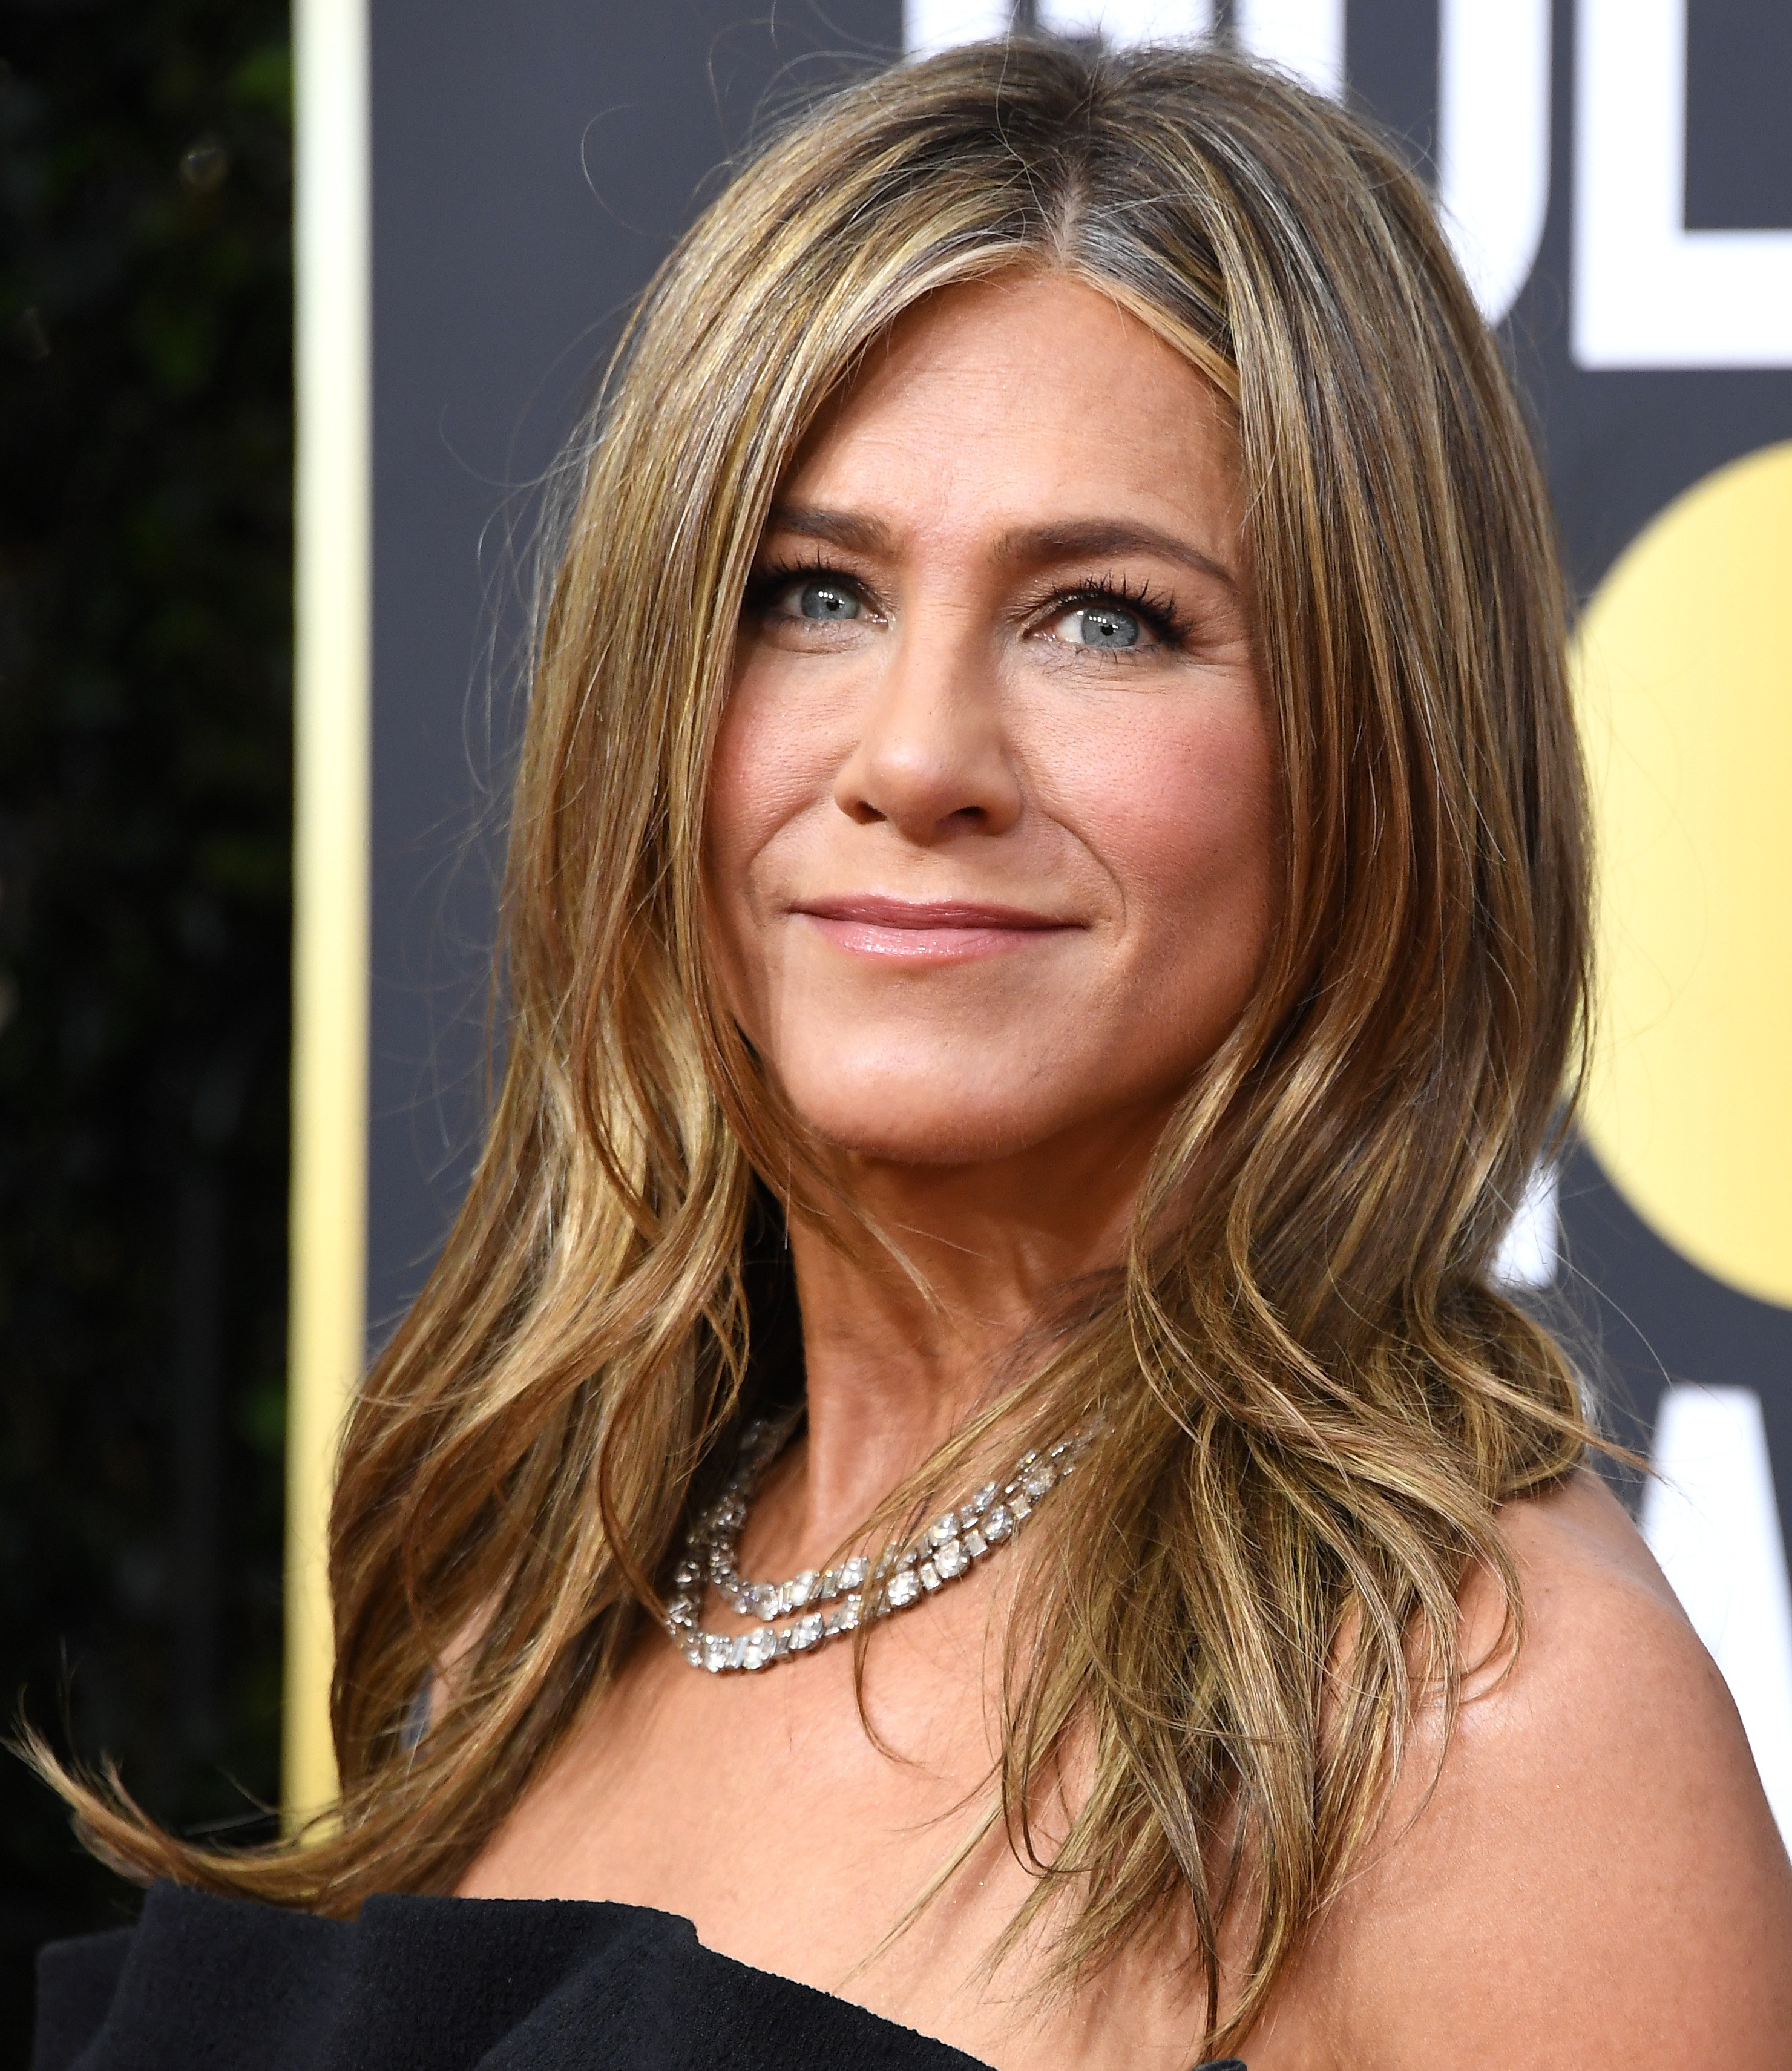 Aniston smiles at the camera while at a red carpet event